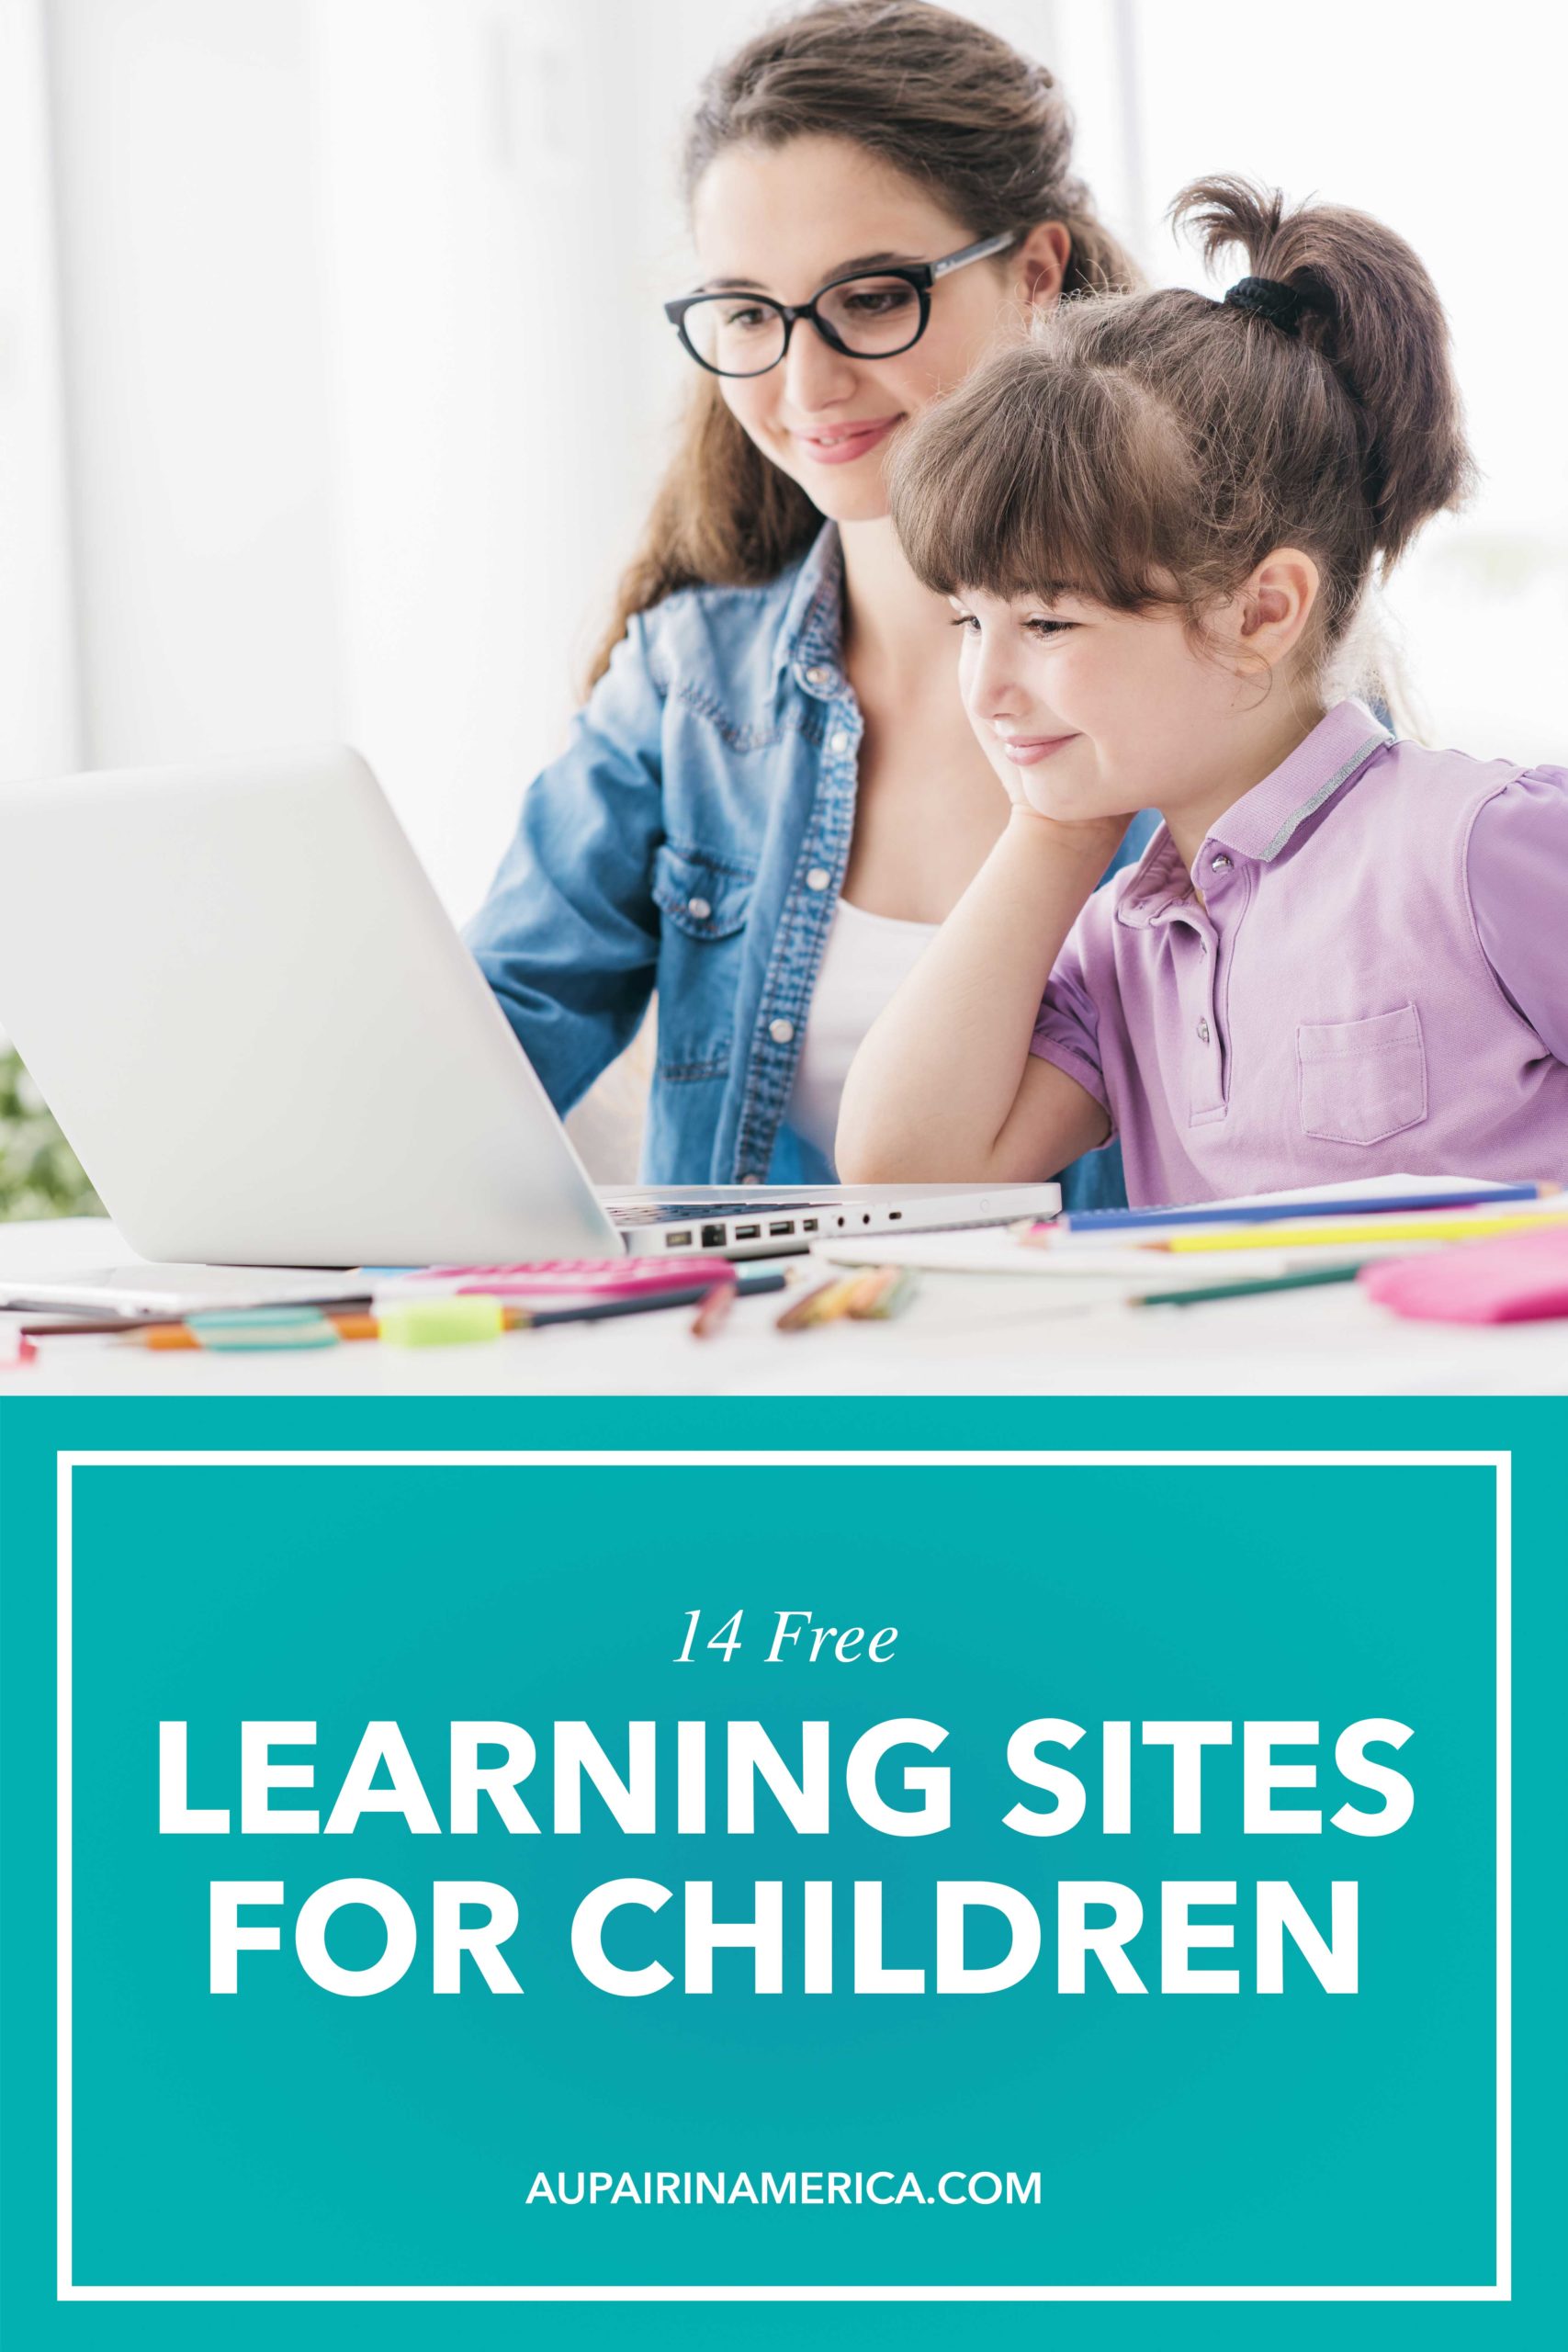 Check out these 14 free learning sites for children!